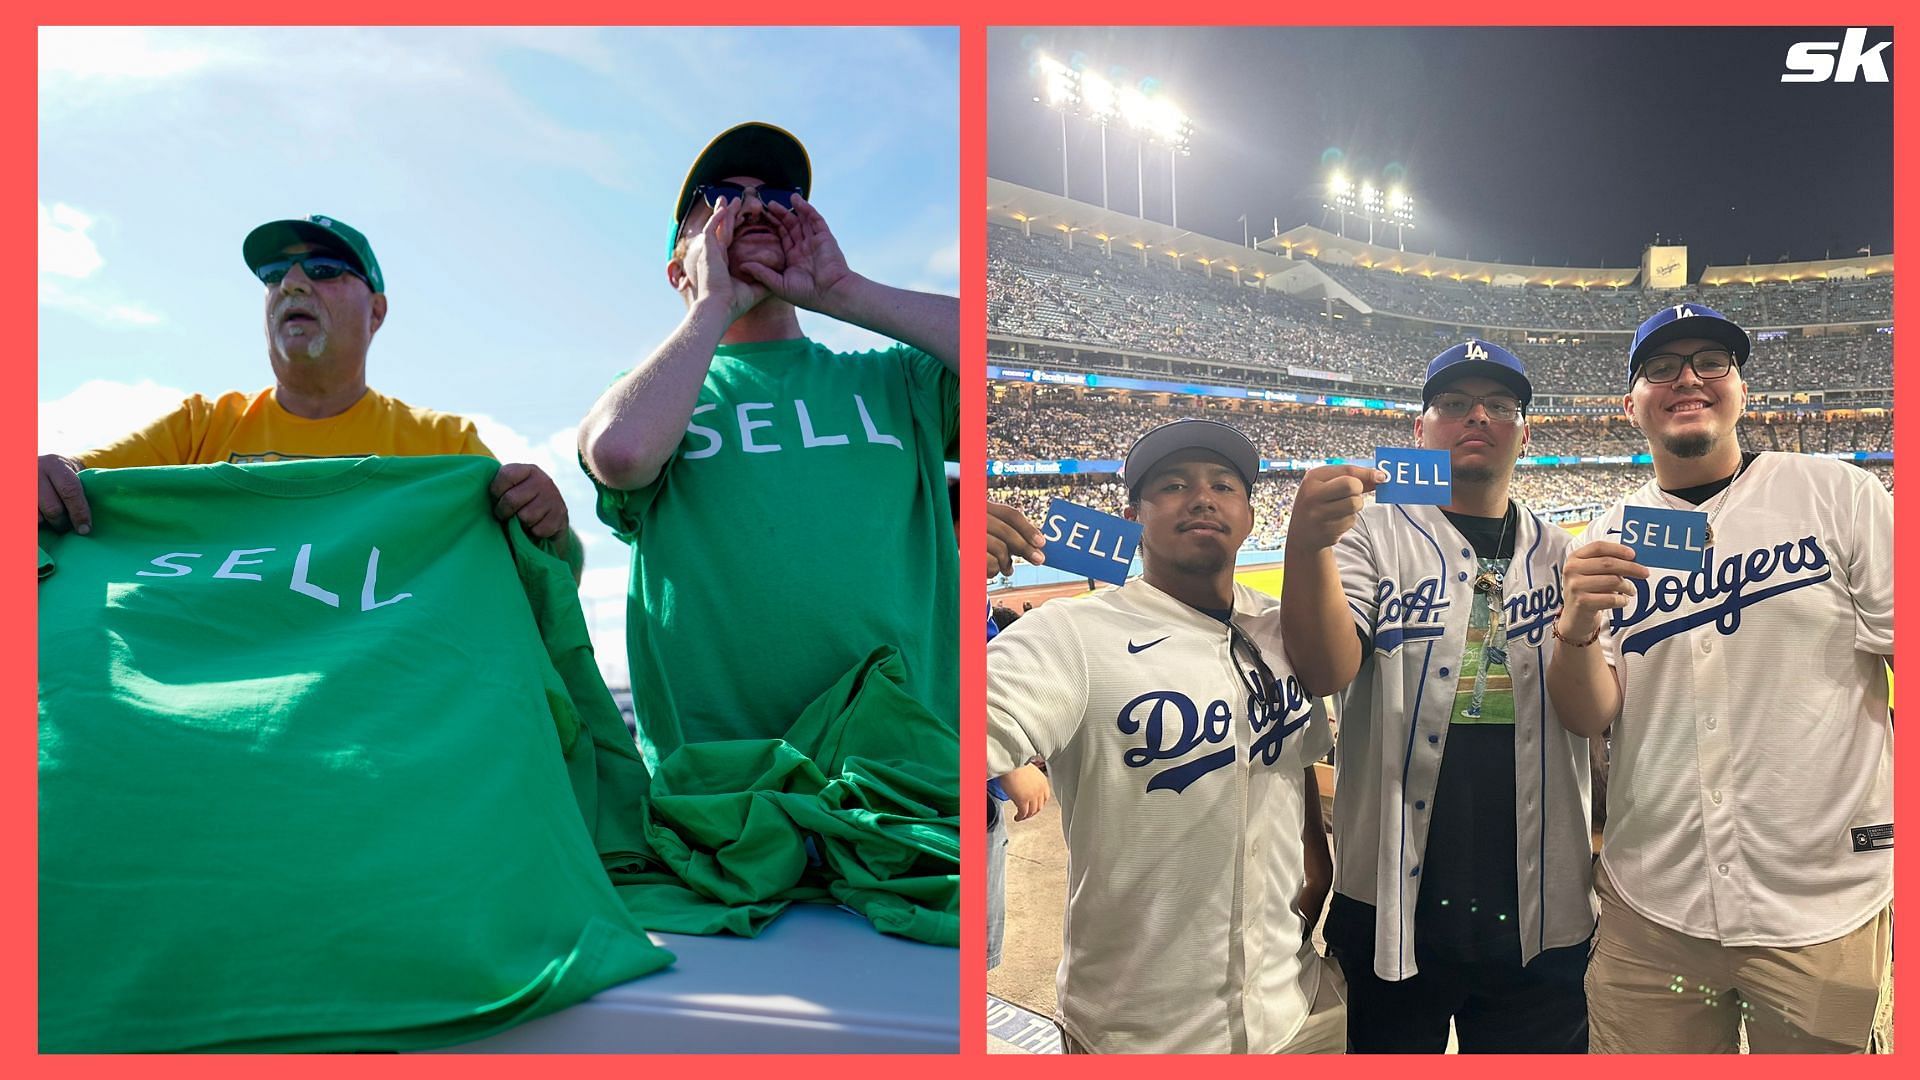 Dodgers and Athletics fans unite to chant &quot;sell the team&quot; during game between the two teams